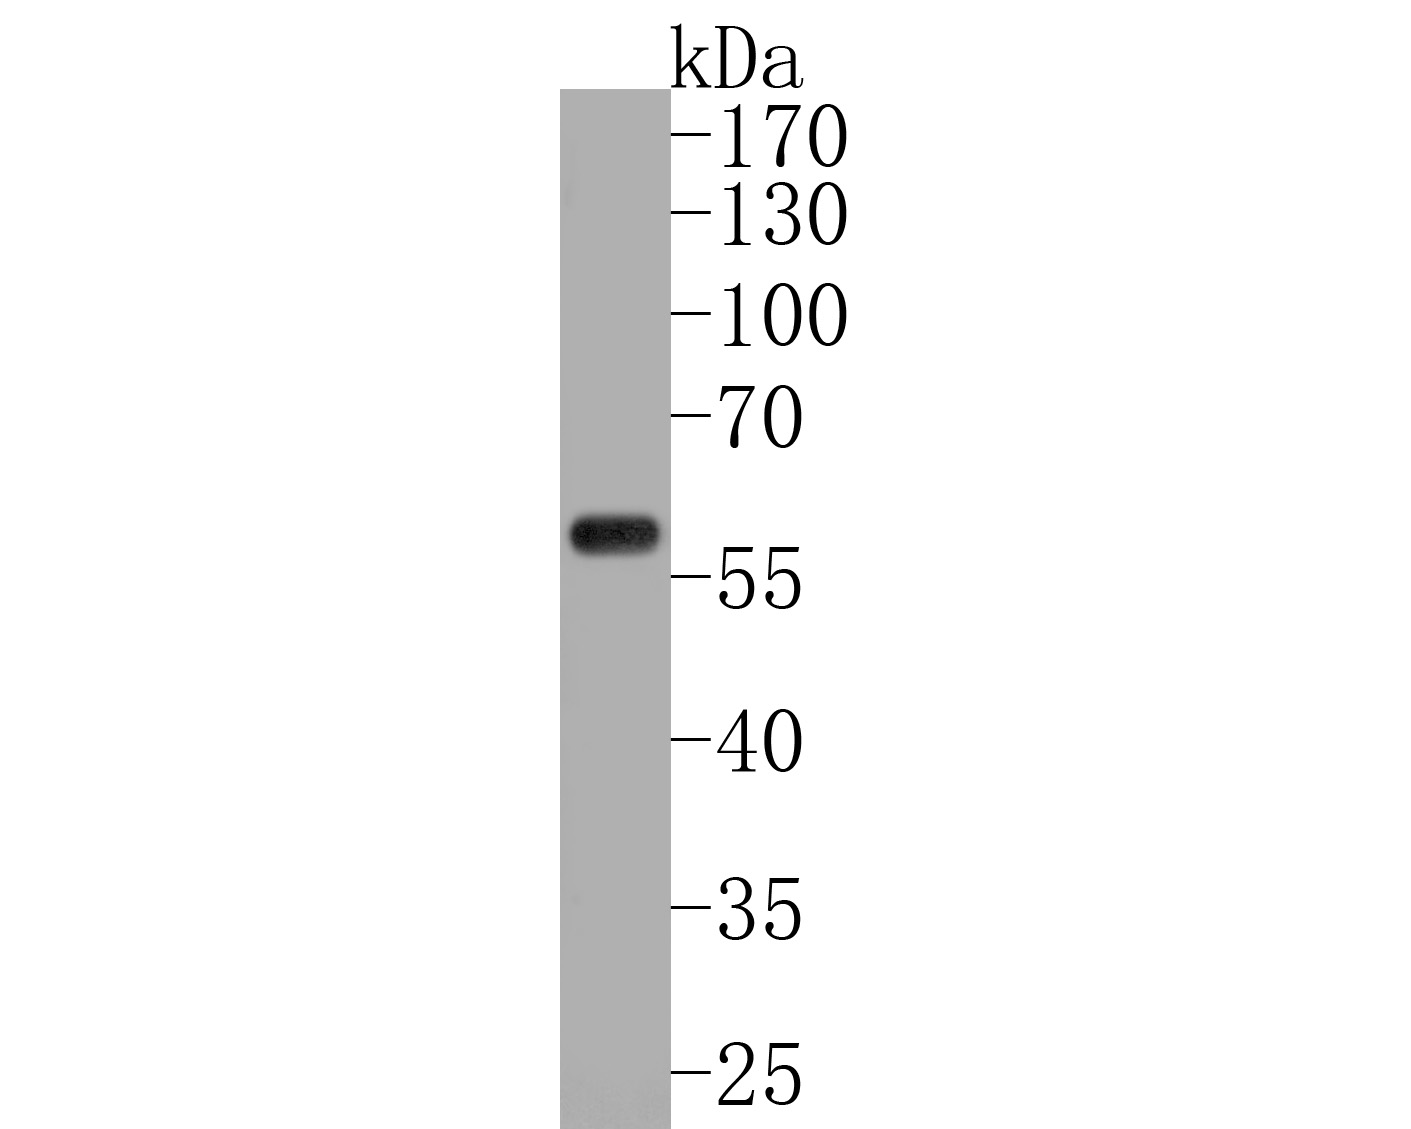 Western blot analysis of PDCD7 on rat stomach tissue lysates. Proteins were transferred to a PVDF membrane and blocked with 5% BSA in PBS for 1 hour at room temperature. The primary antibody (HA720033, 1/500) was used in 5% BSA at room temperature for 2 hours. Goat Anti-Rabbit IgG - HRP Secondary Antibody (HA1001) at 1:200,000 dilution was used for 1 hour at room temperature.